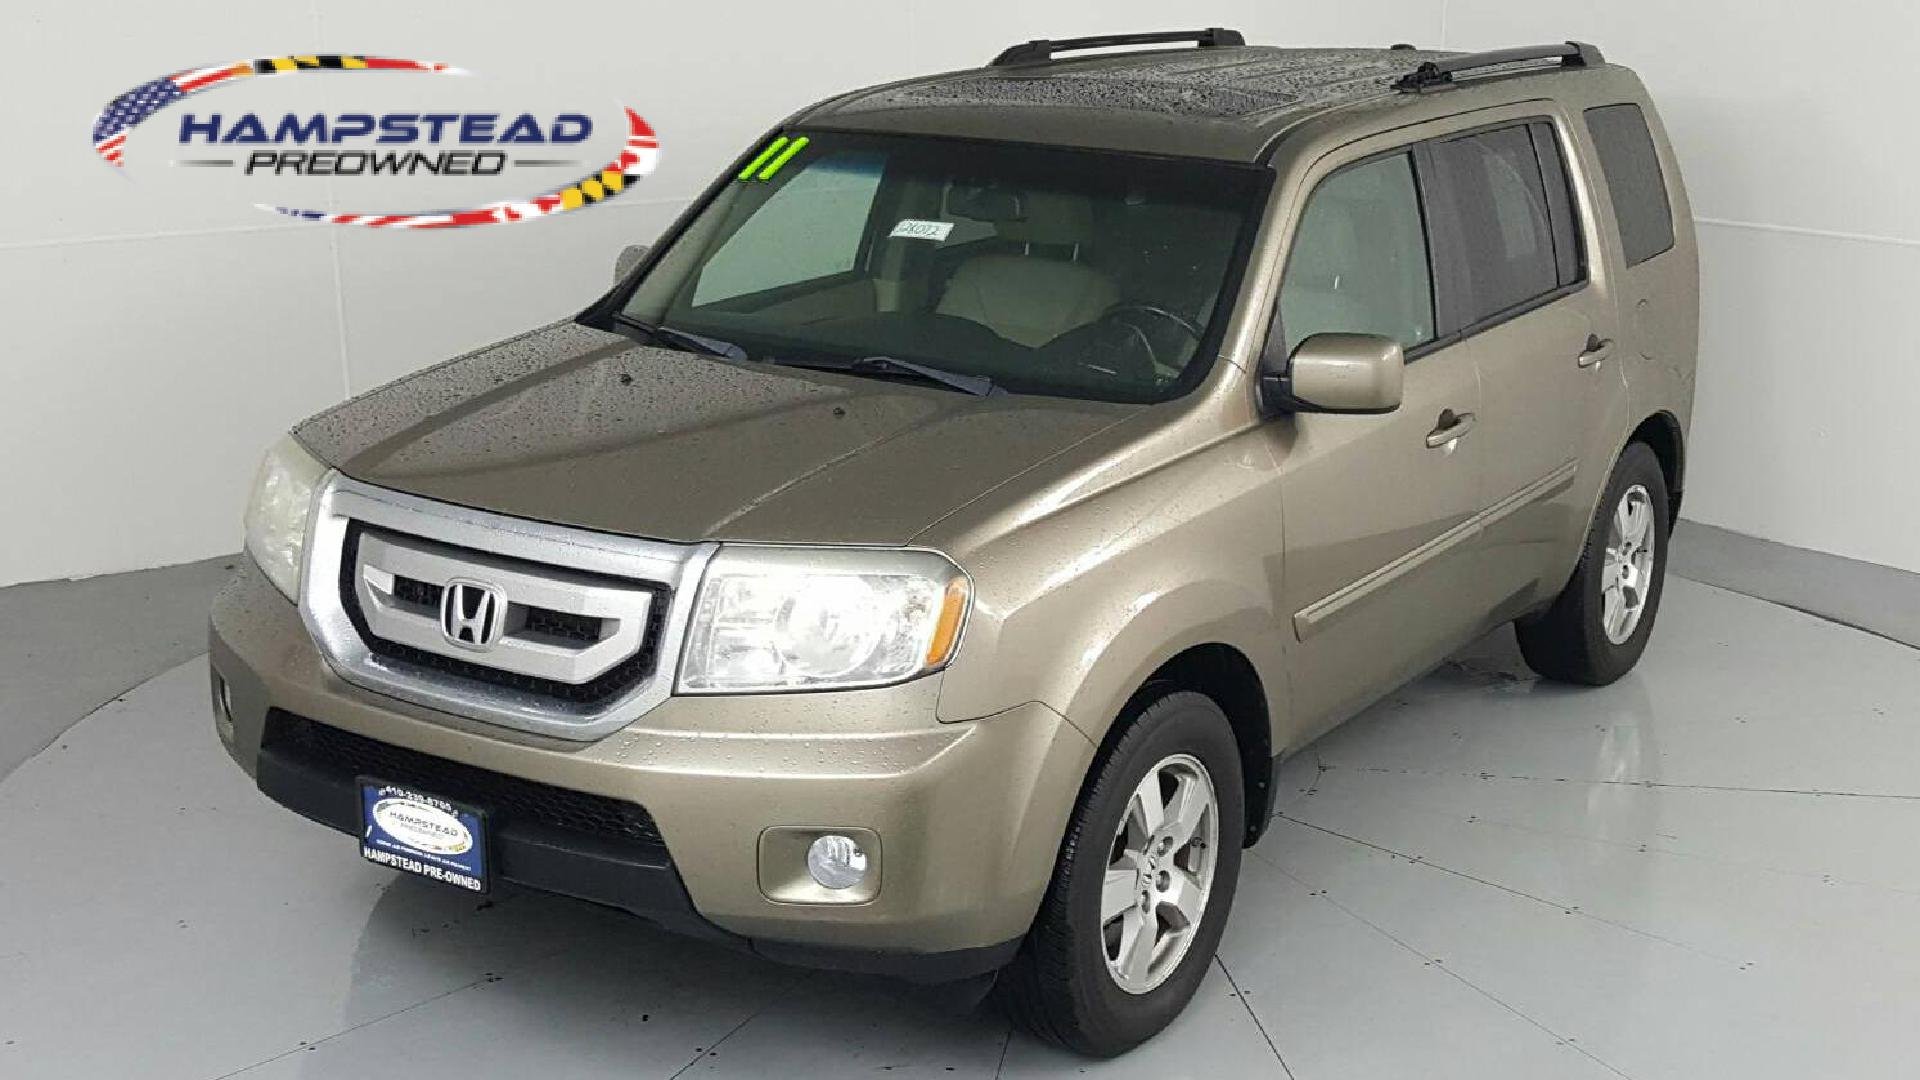 Pre-Owned 2011 Honda PILOT EX-L 4WD Sport Utility Vehicles in Hampstead #HNO028072 | Hampstead